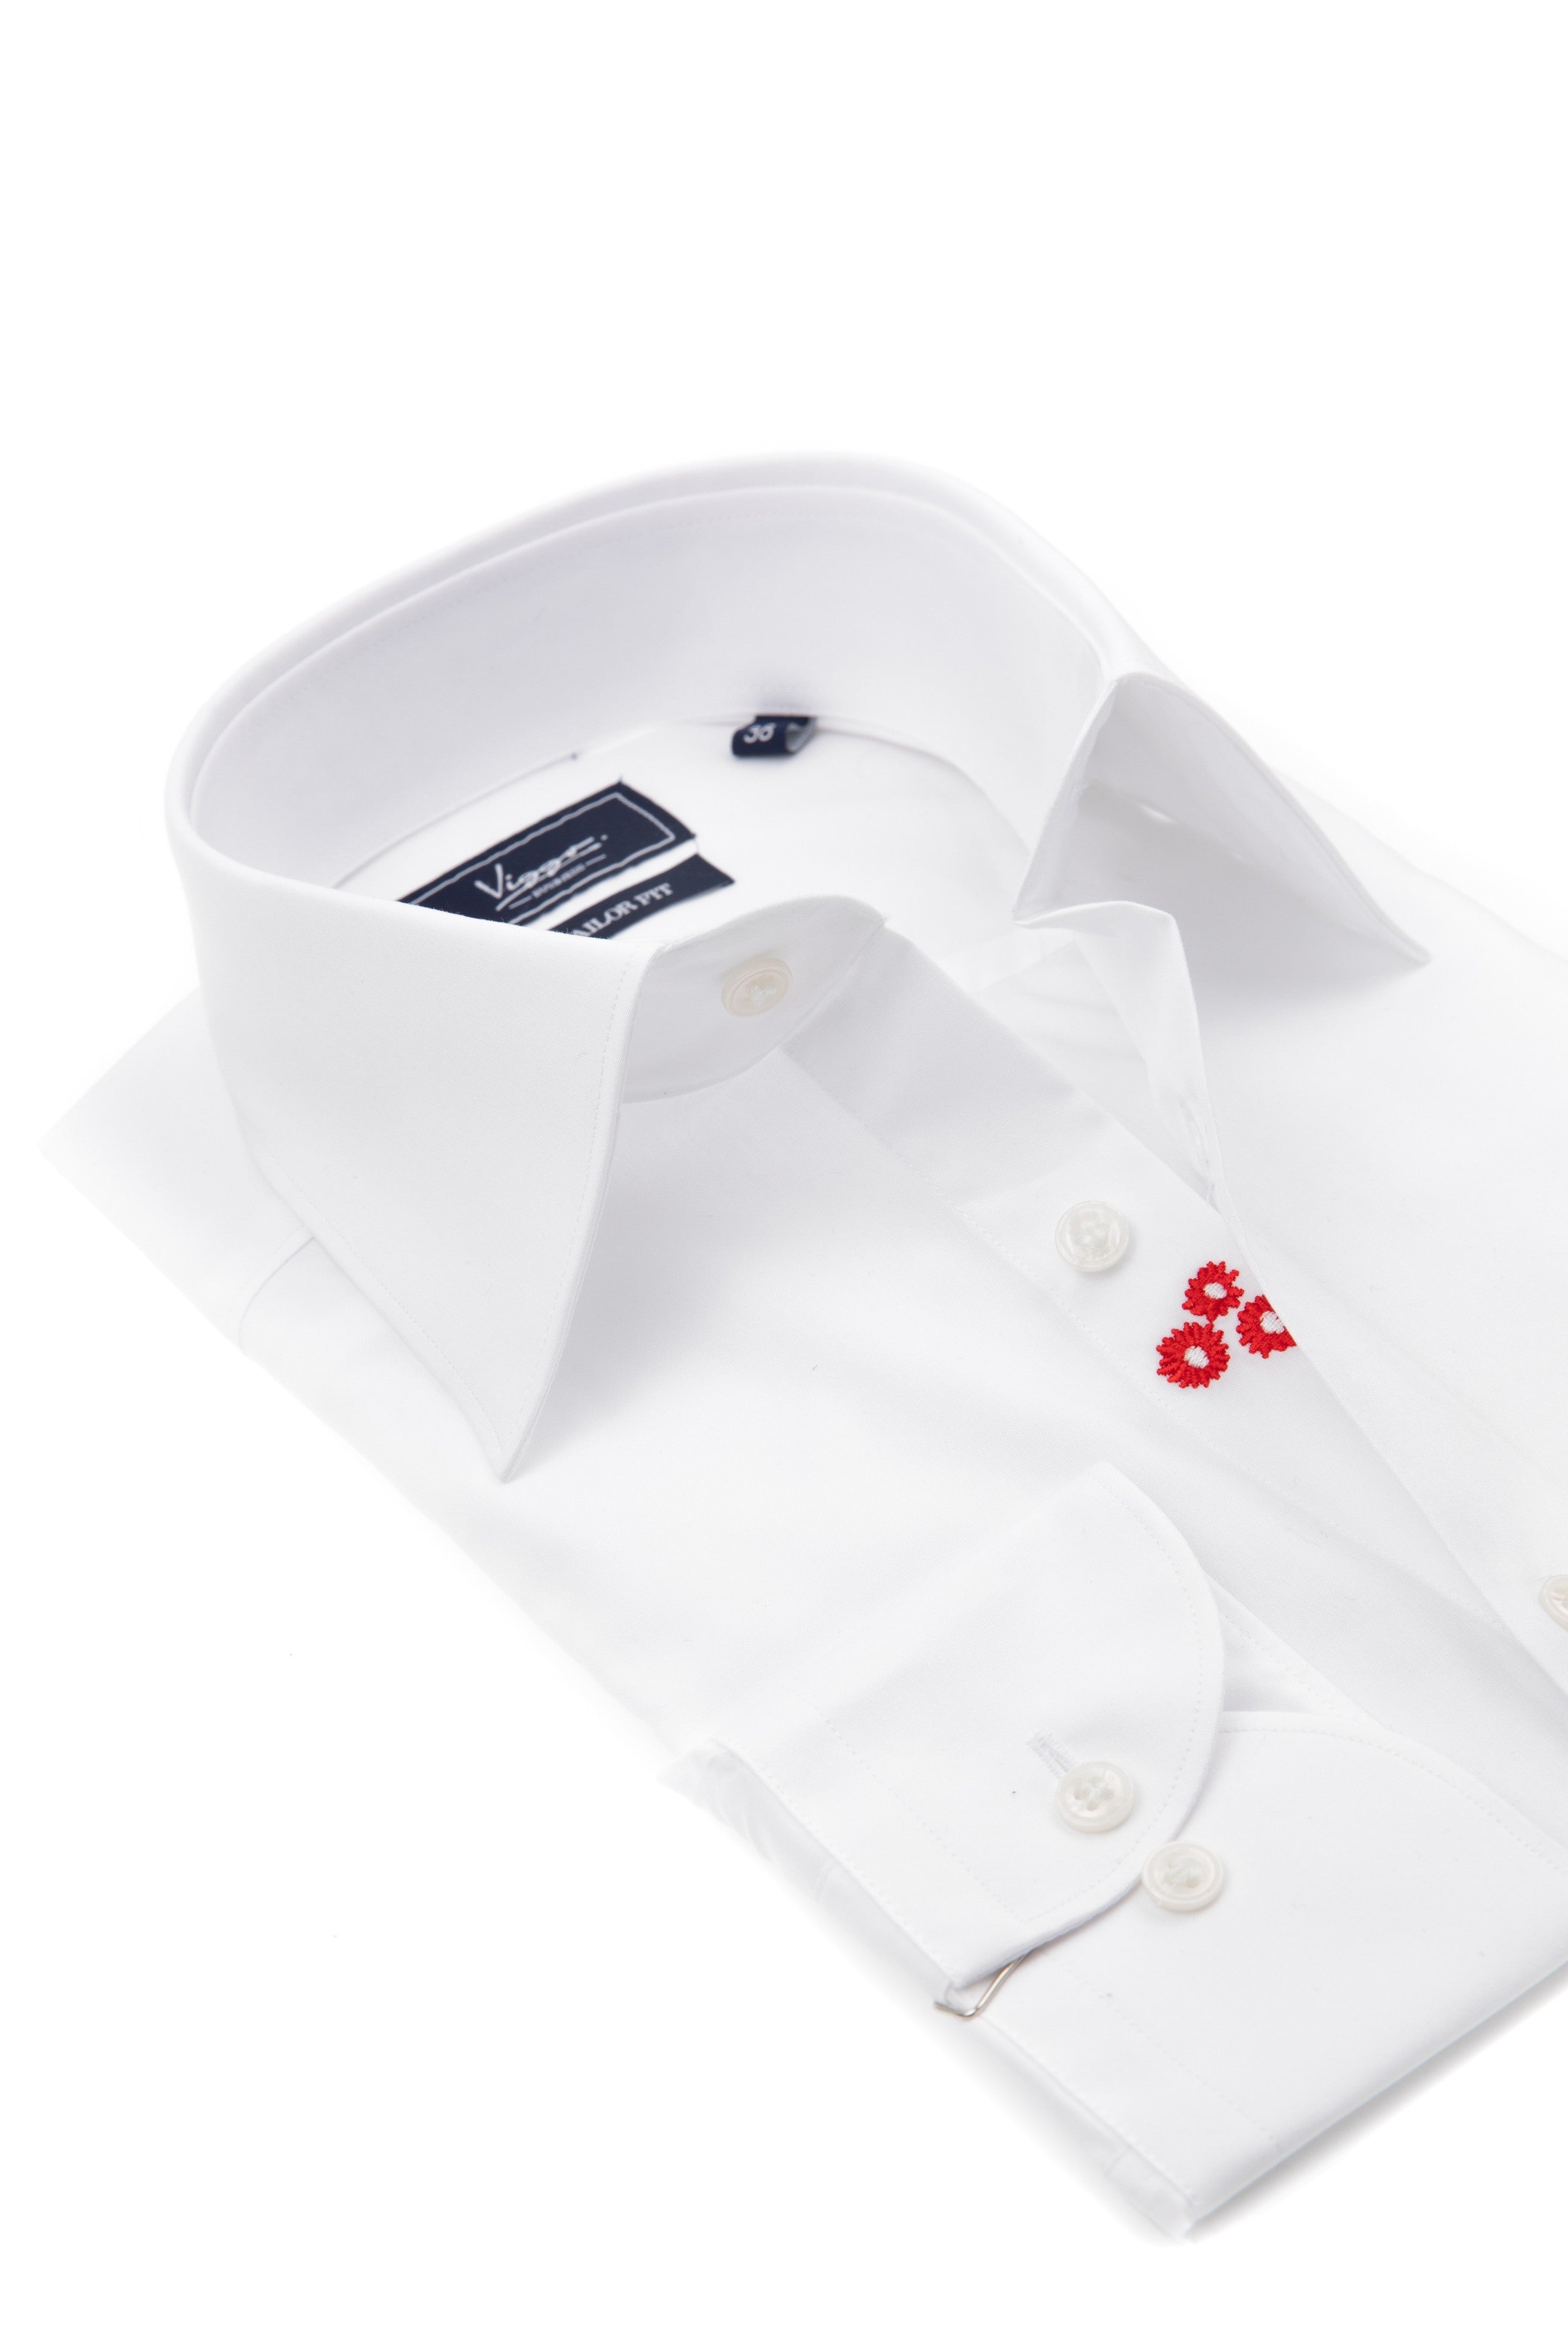 White shirt with red embroidery